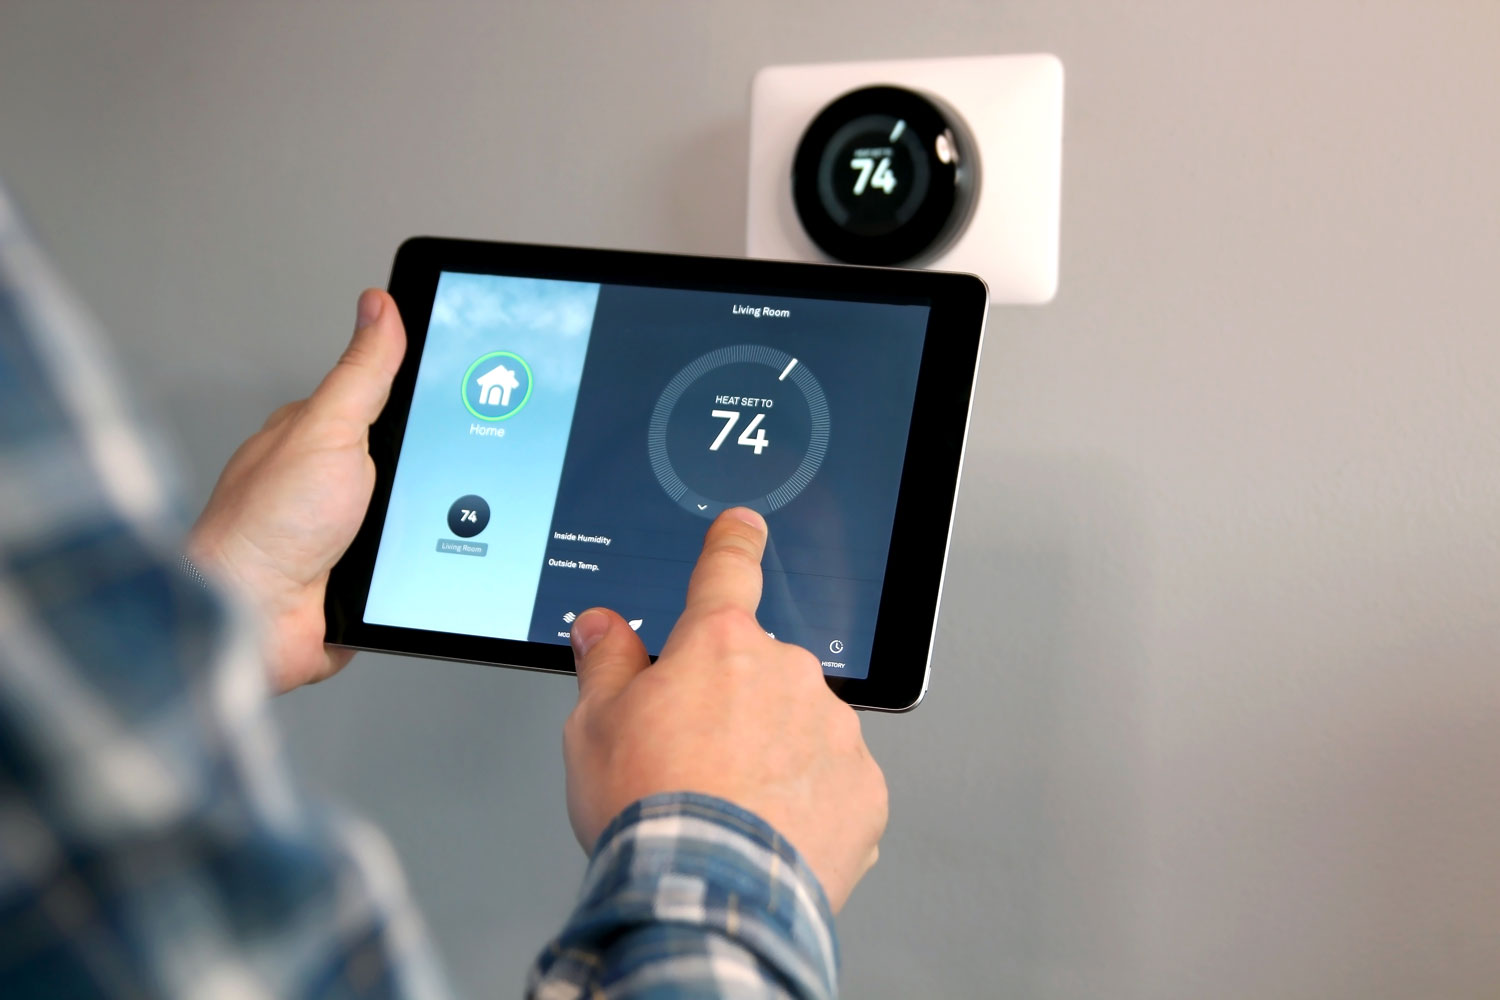 Homeowner changing the thermostat level using an iPad